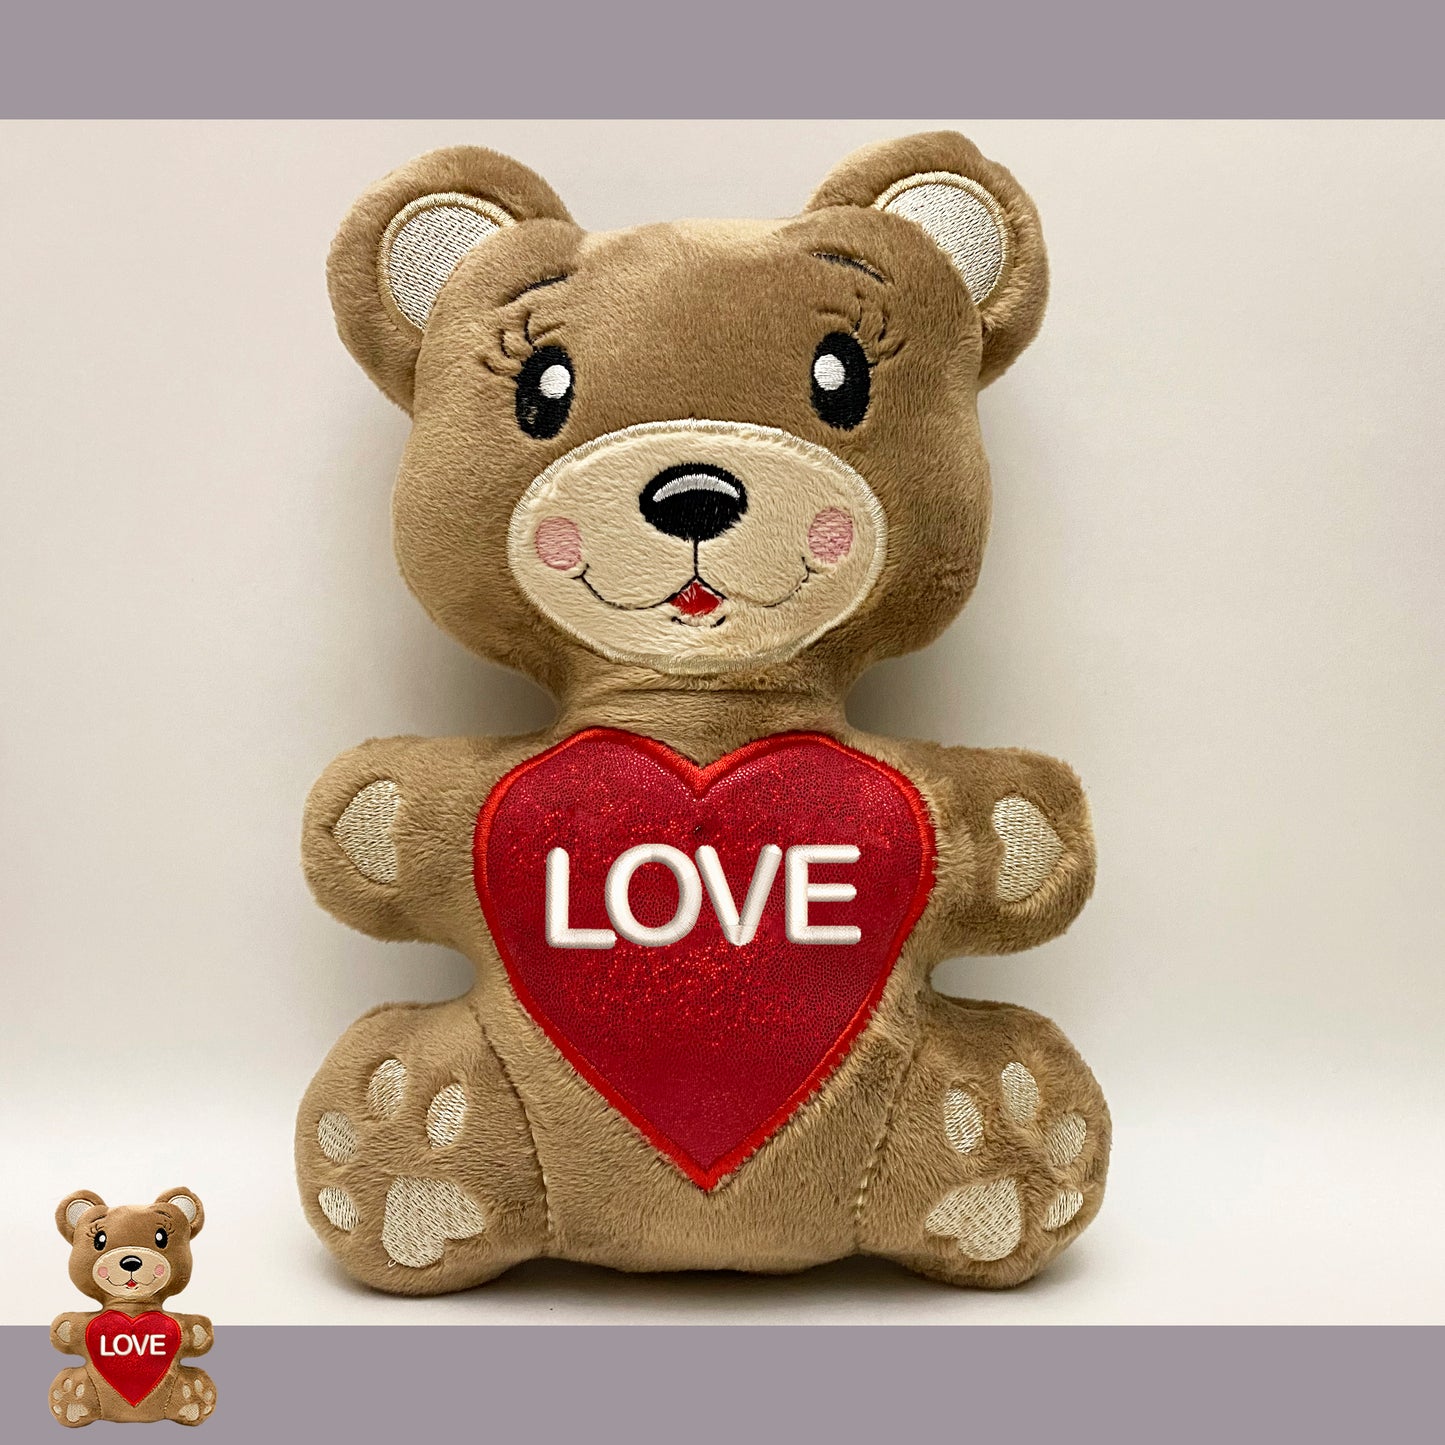 Personalised BearTeddy Stuffed Toy ,Super cute personalised soft plush toy, Personalised Gift, Unique Personalized Birthday Gifts , Custom Gifts For Children